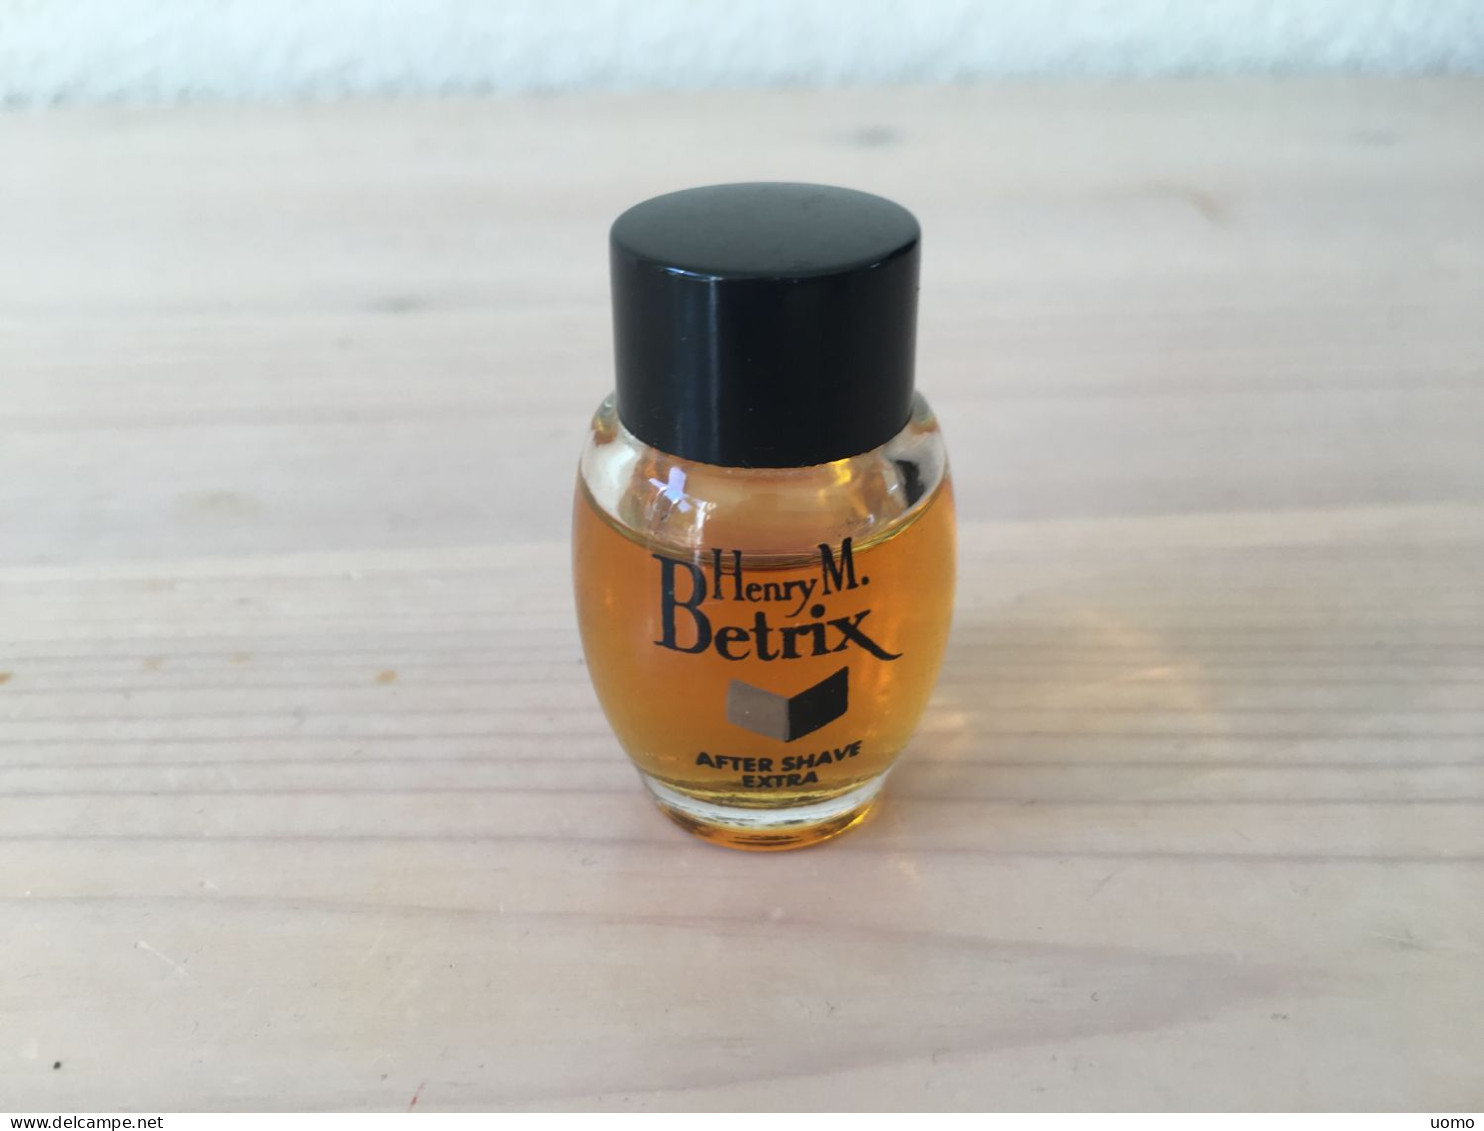 Henry M Betrix AS Extra 6 Ml - Miniature Bottles (without Box)